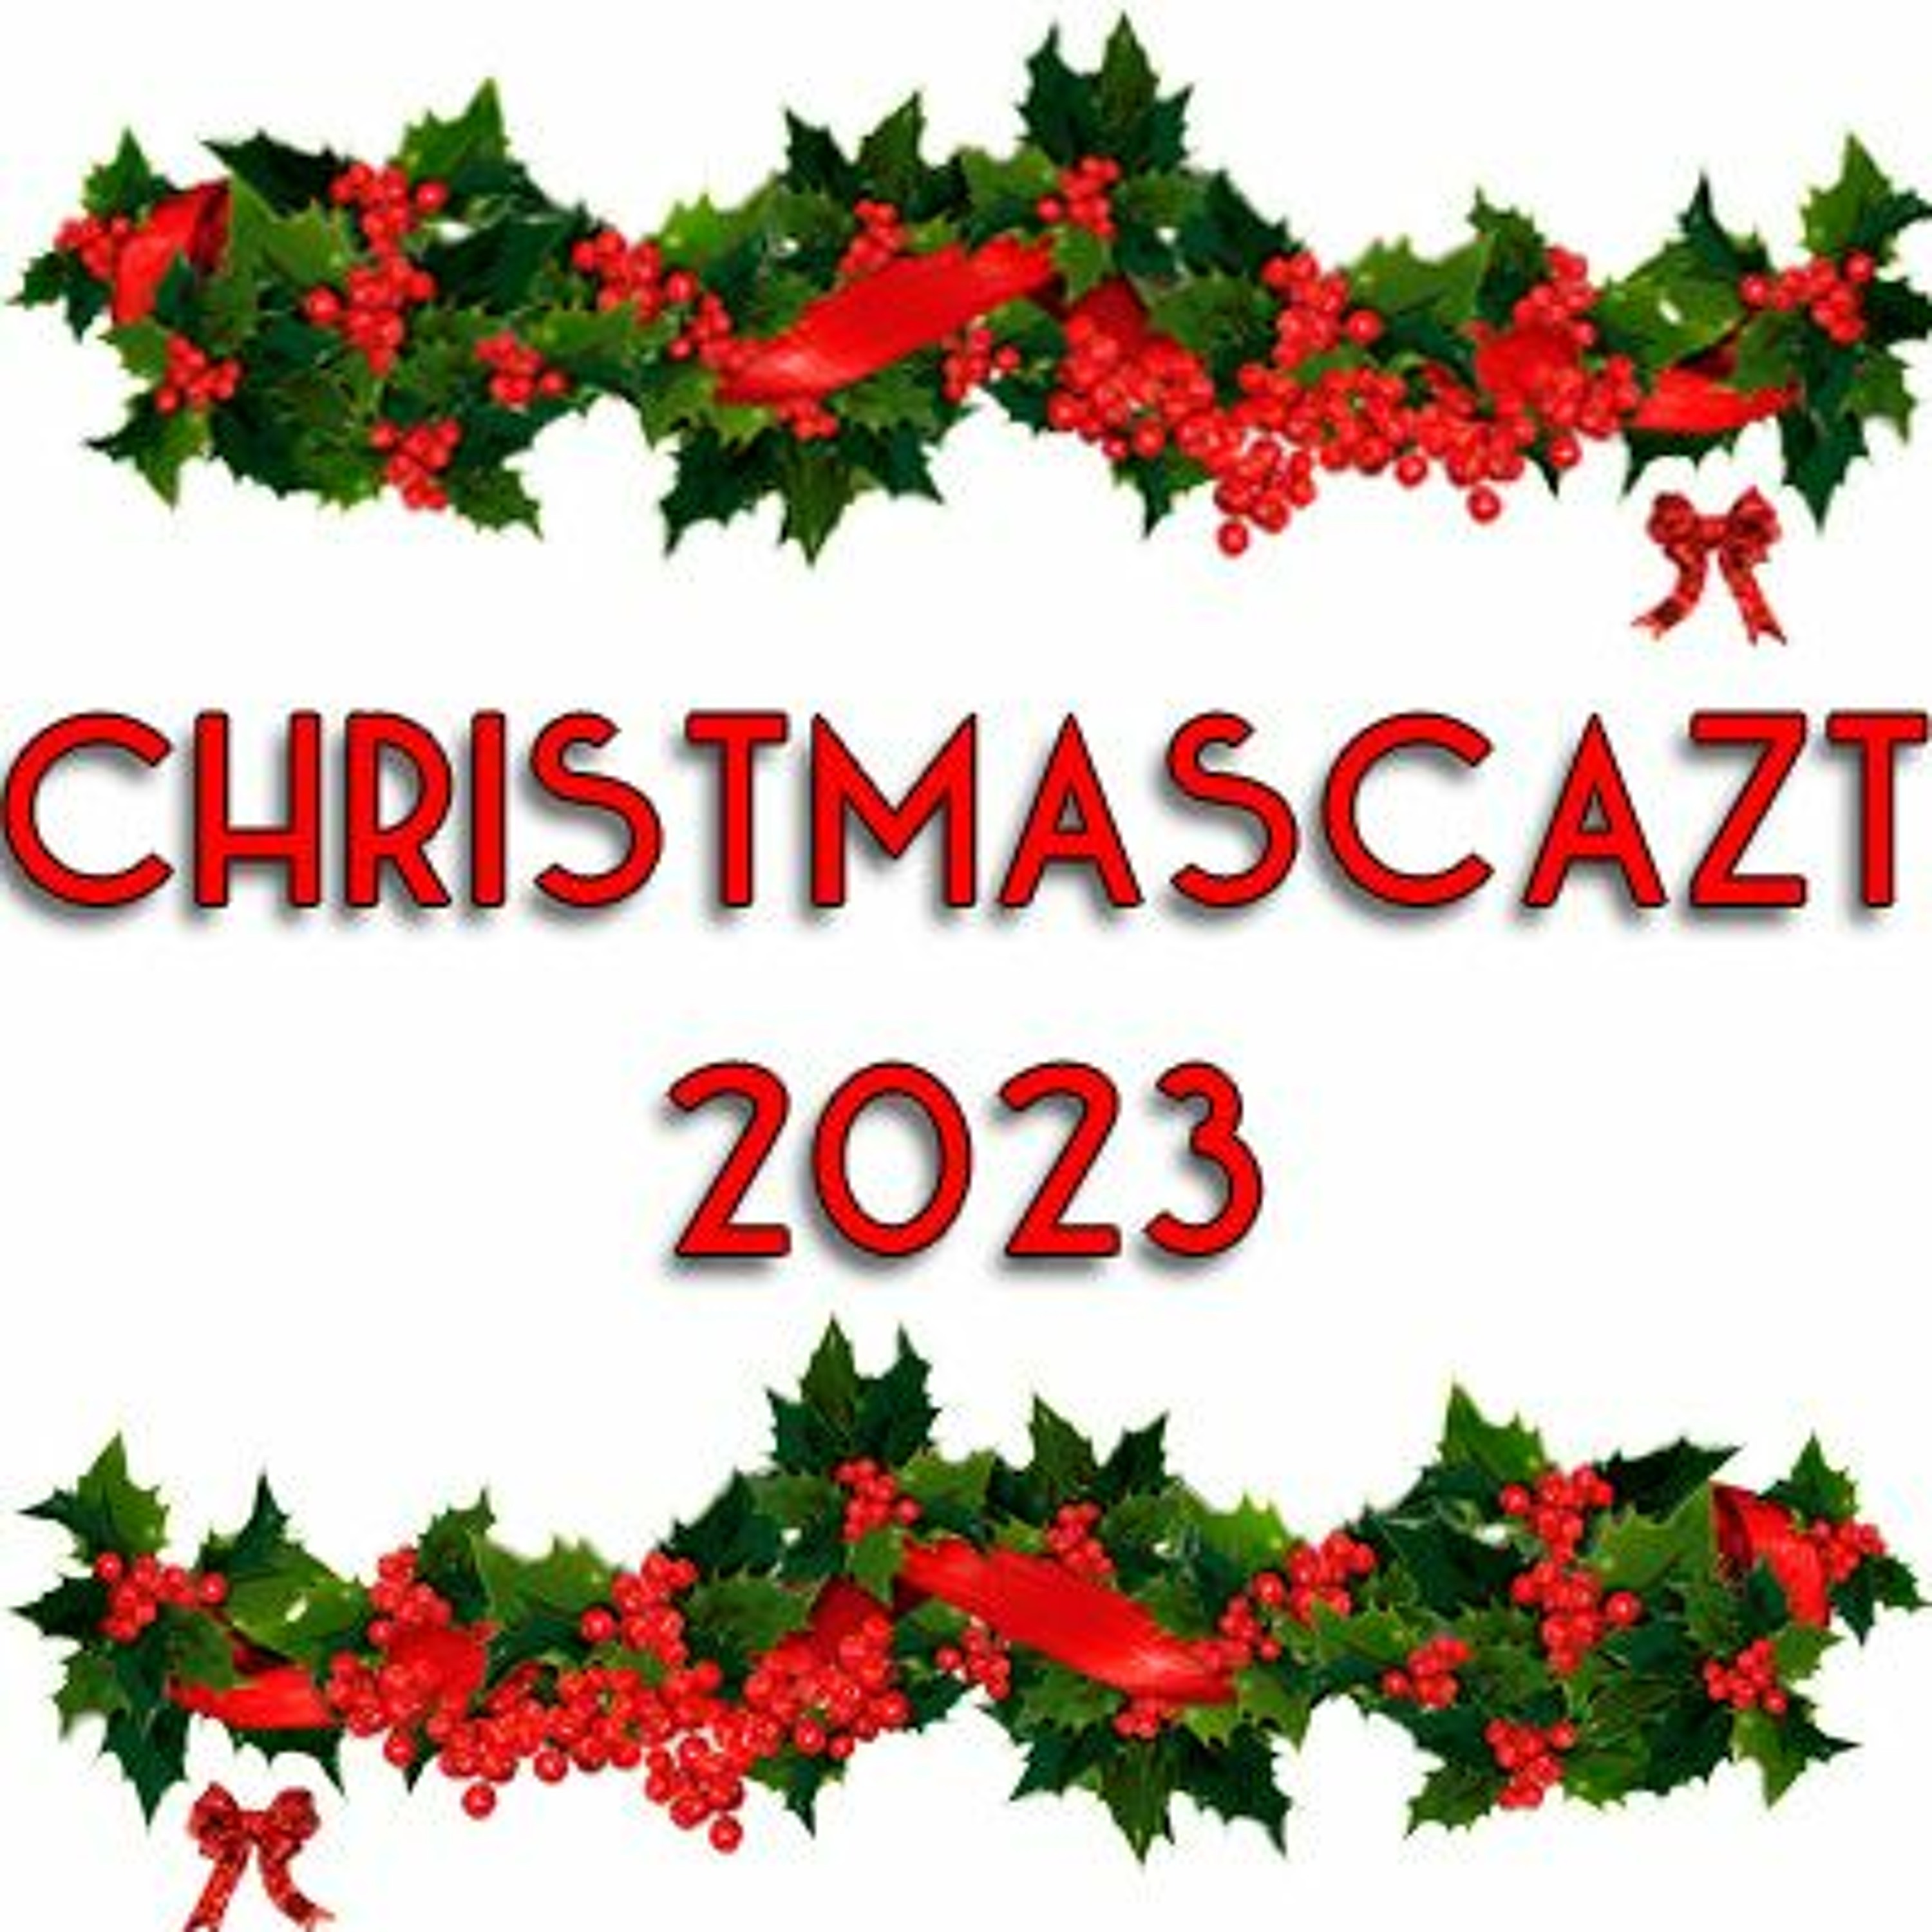 ADVENTCAzT 2023 – 26 – Holy Innocents: The cold winter of unbelief